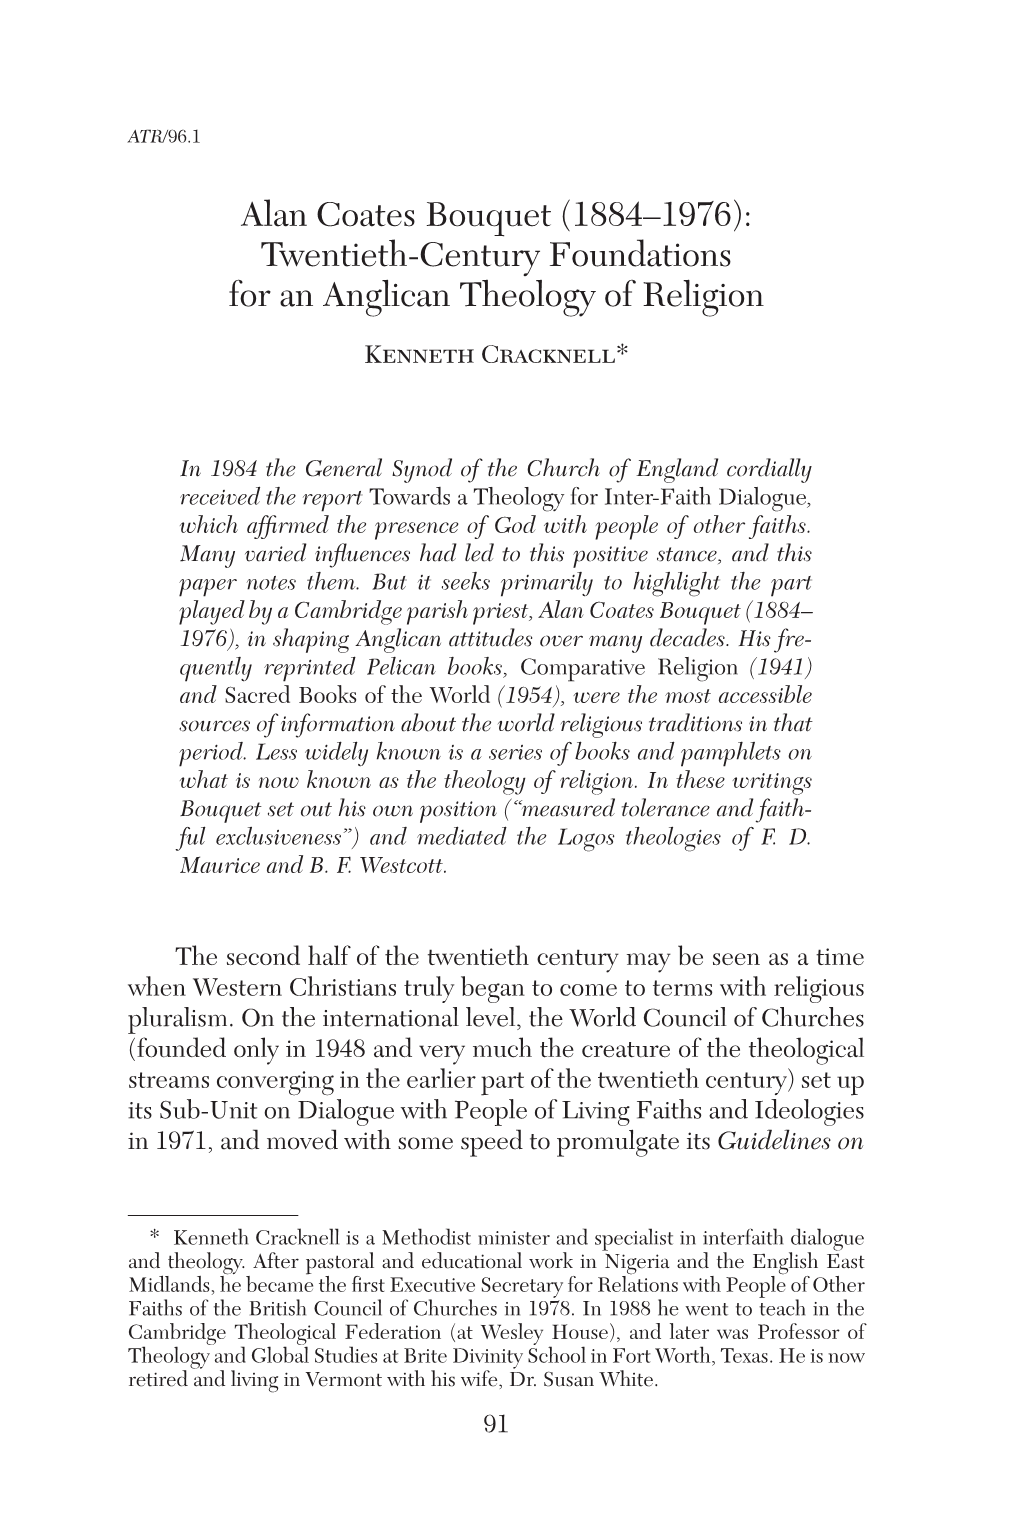 Alan Coates Bouquet (1884–1976): Twentieth-Century Foundations for an Anglican Theology of Religion